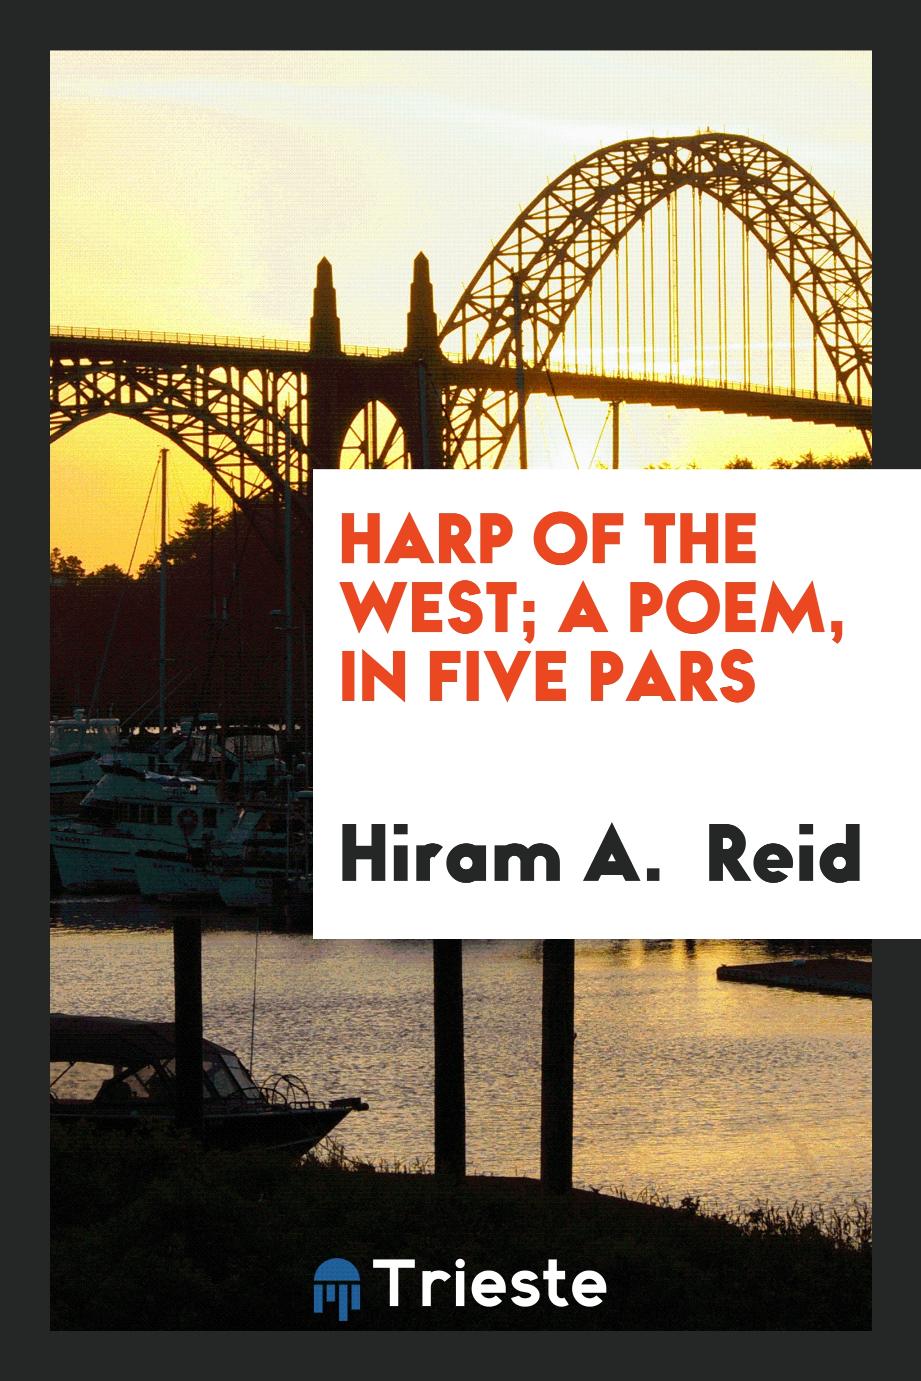 Harp of the West; a poem, in five pars